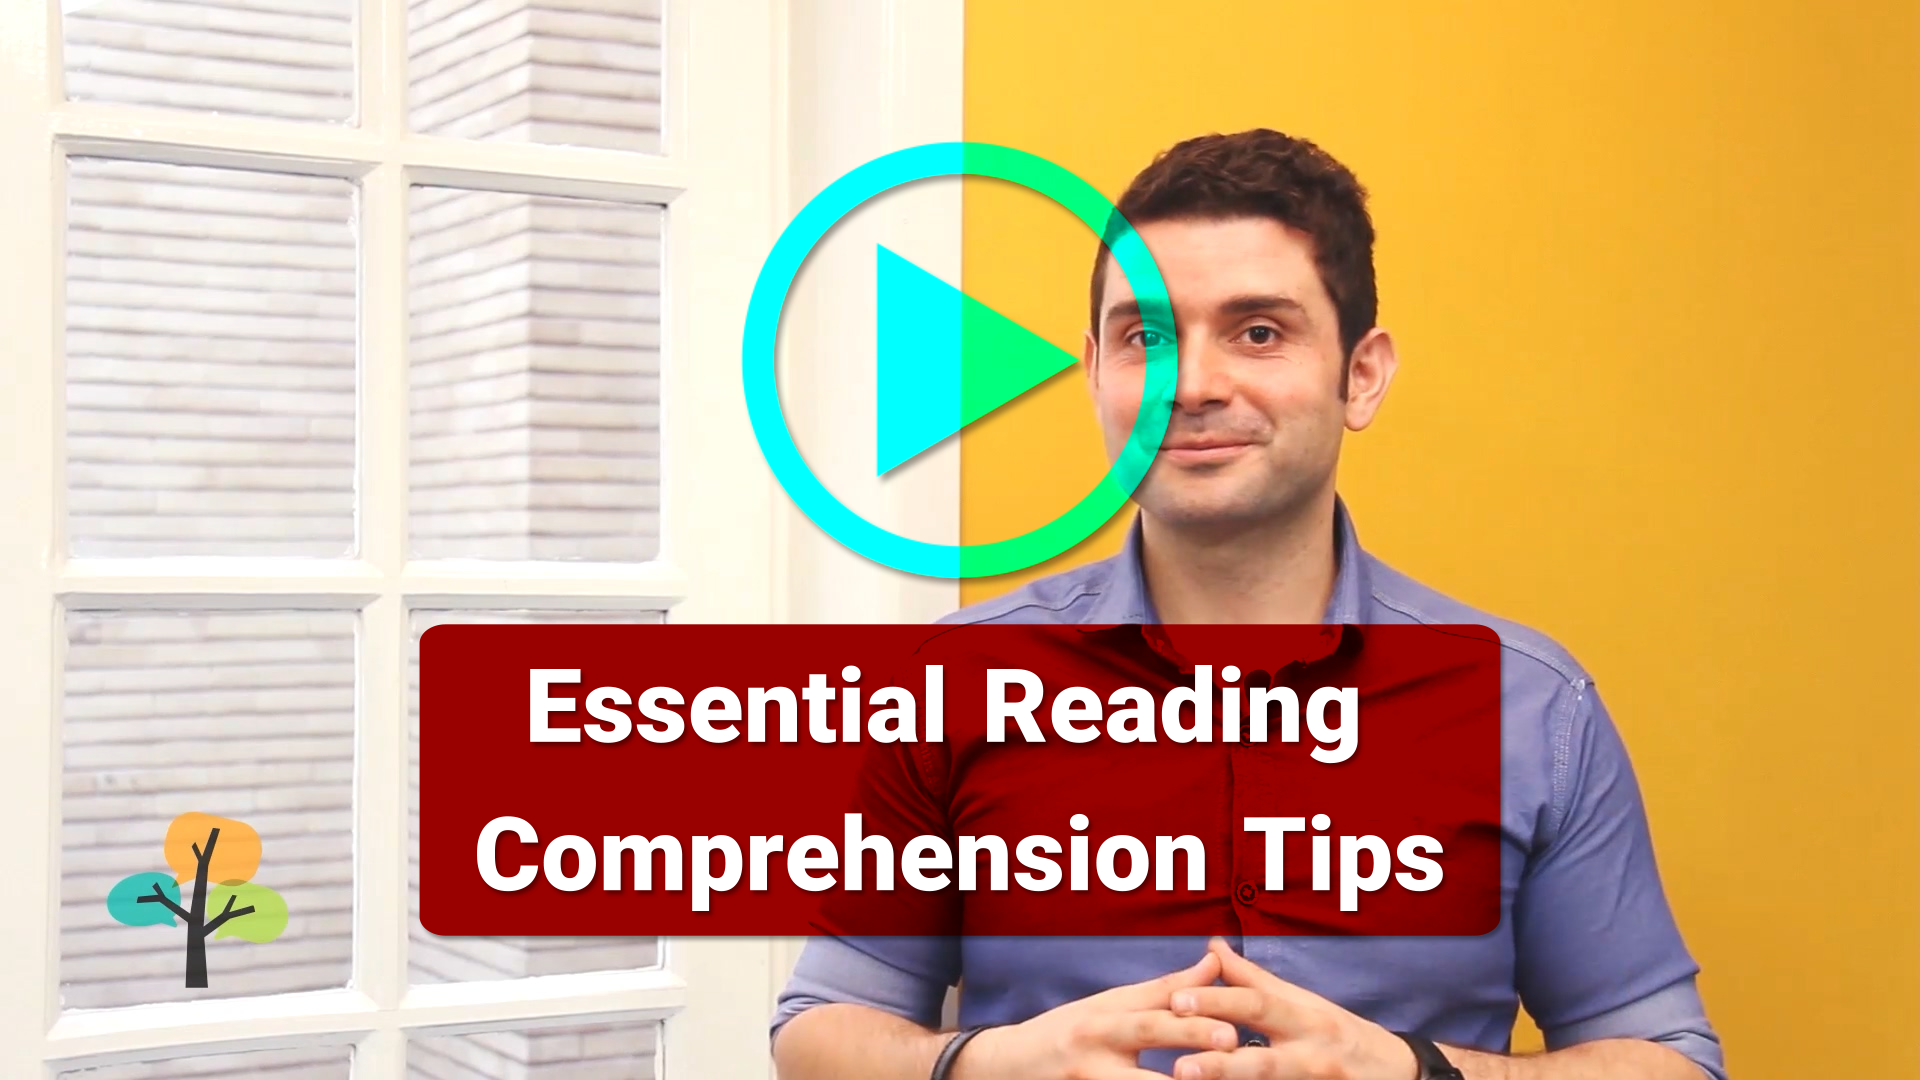 The significance of comprehension in Reading